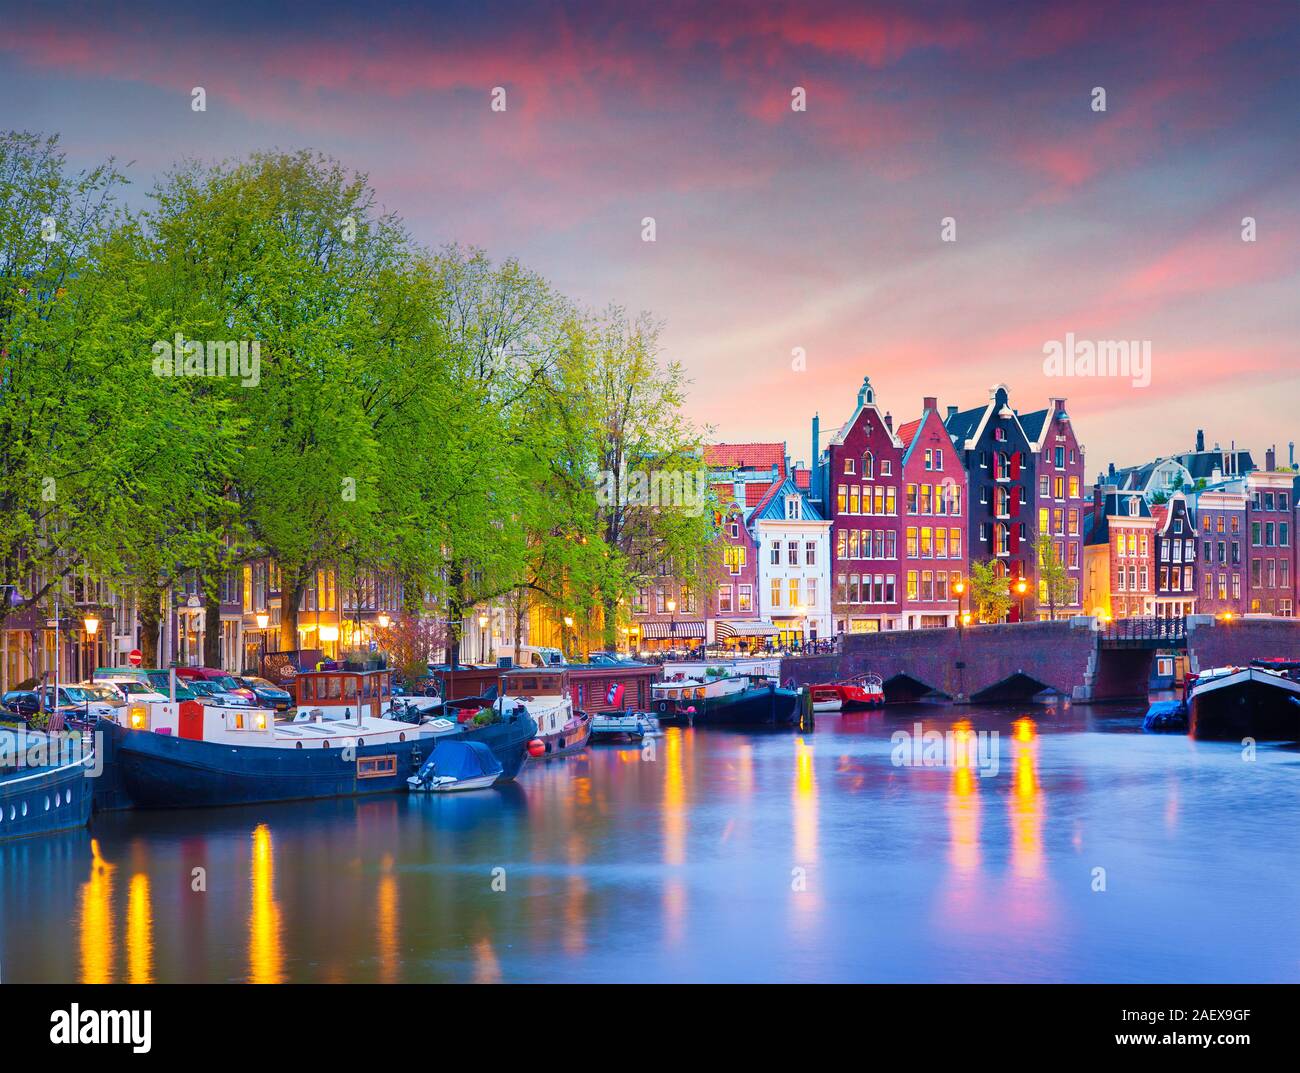 Colorful spring sunset on the canals of Amsterdam. Authentic Dutch architecture in the capital and most populous city of the Netherlands. Stock Photo